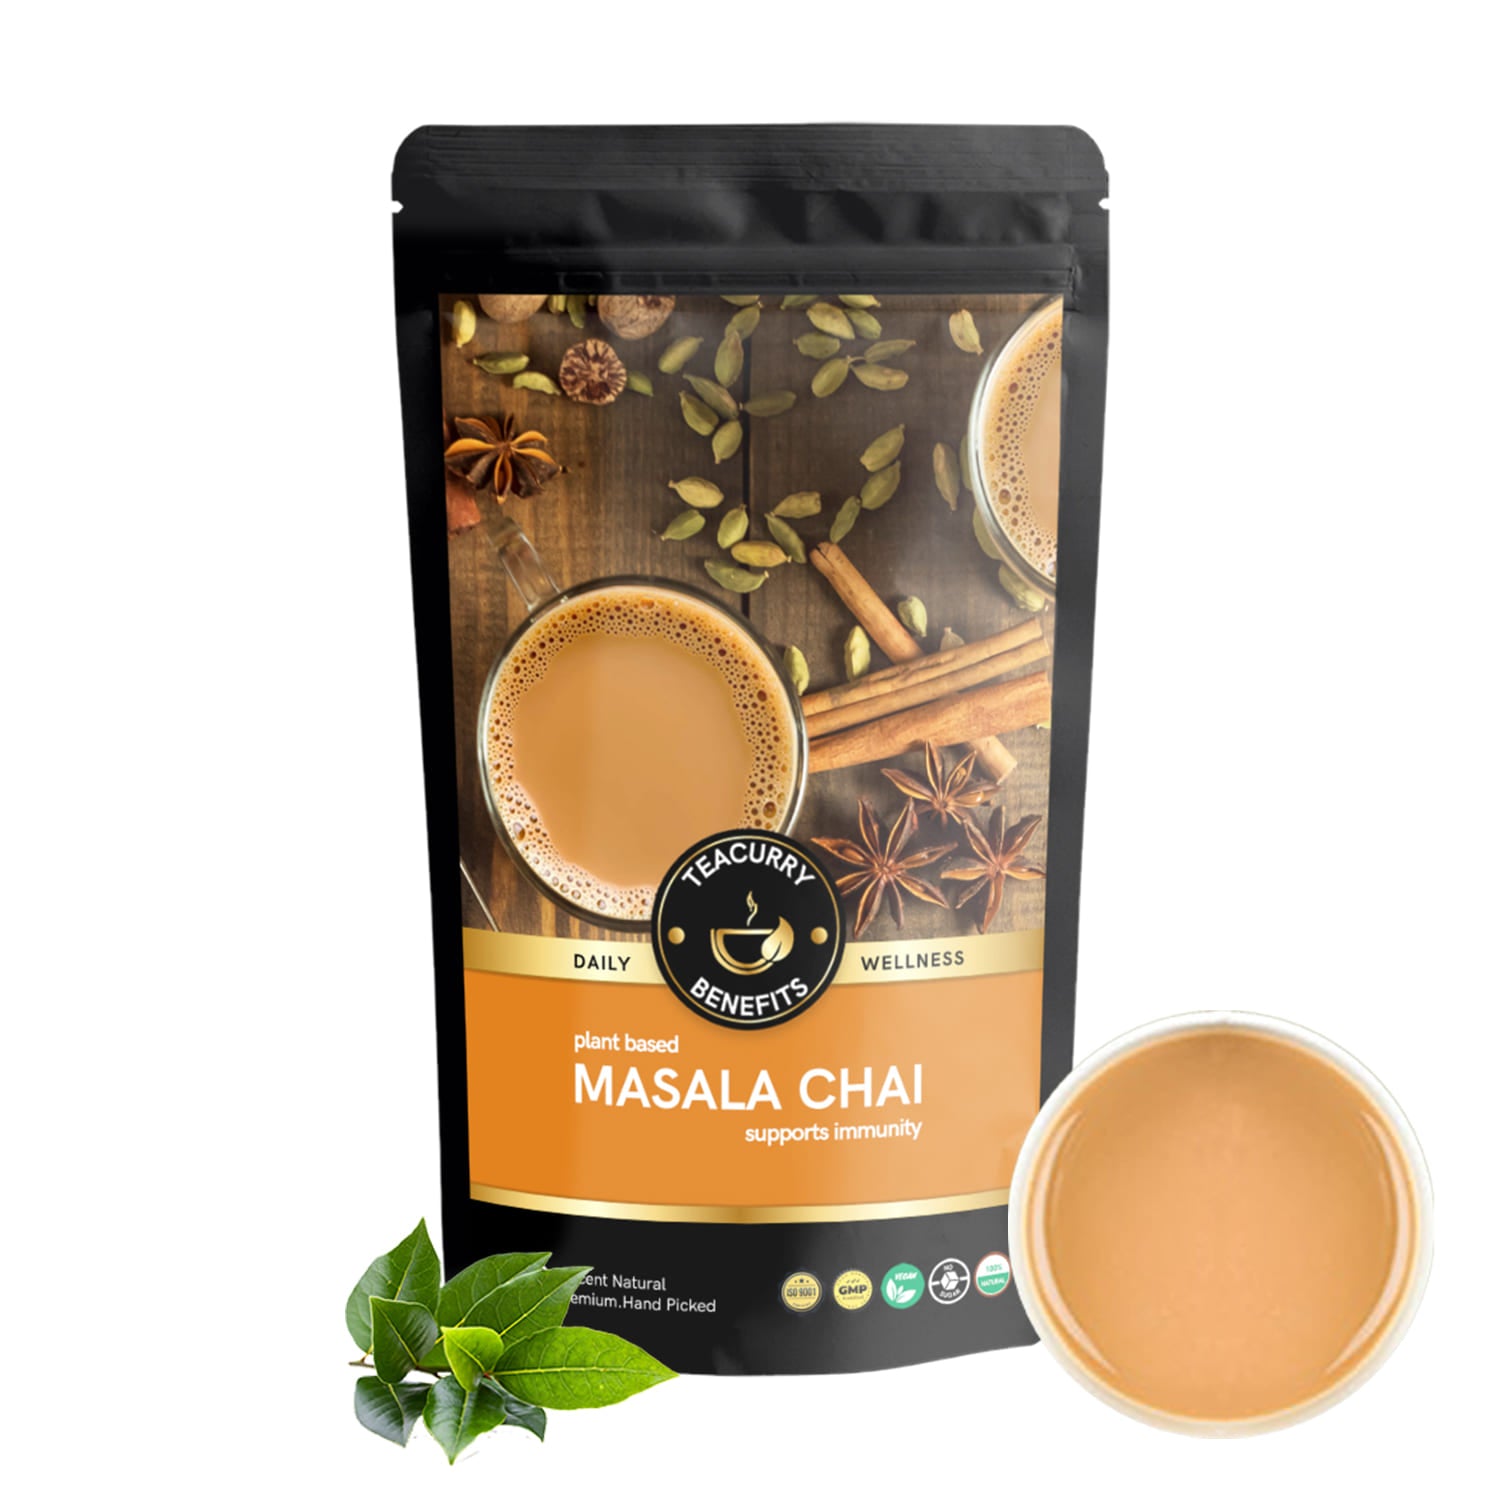 Teacurry Masala Chai Tea - Original Blend of Indian Native Spices with Assam Black Tea - No Added Flavors - Immunity Chai